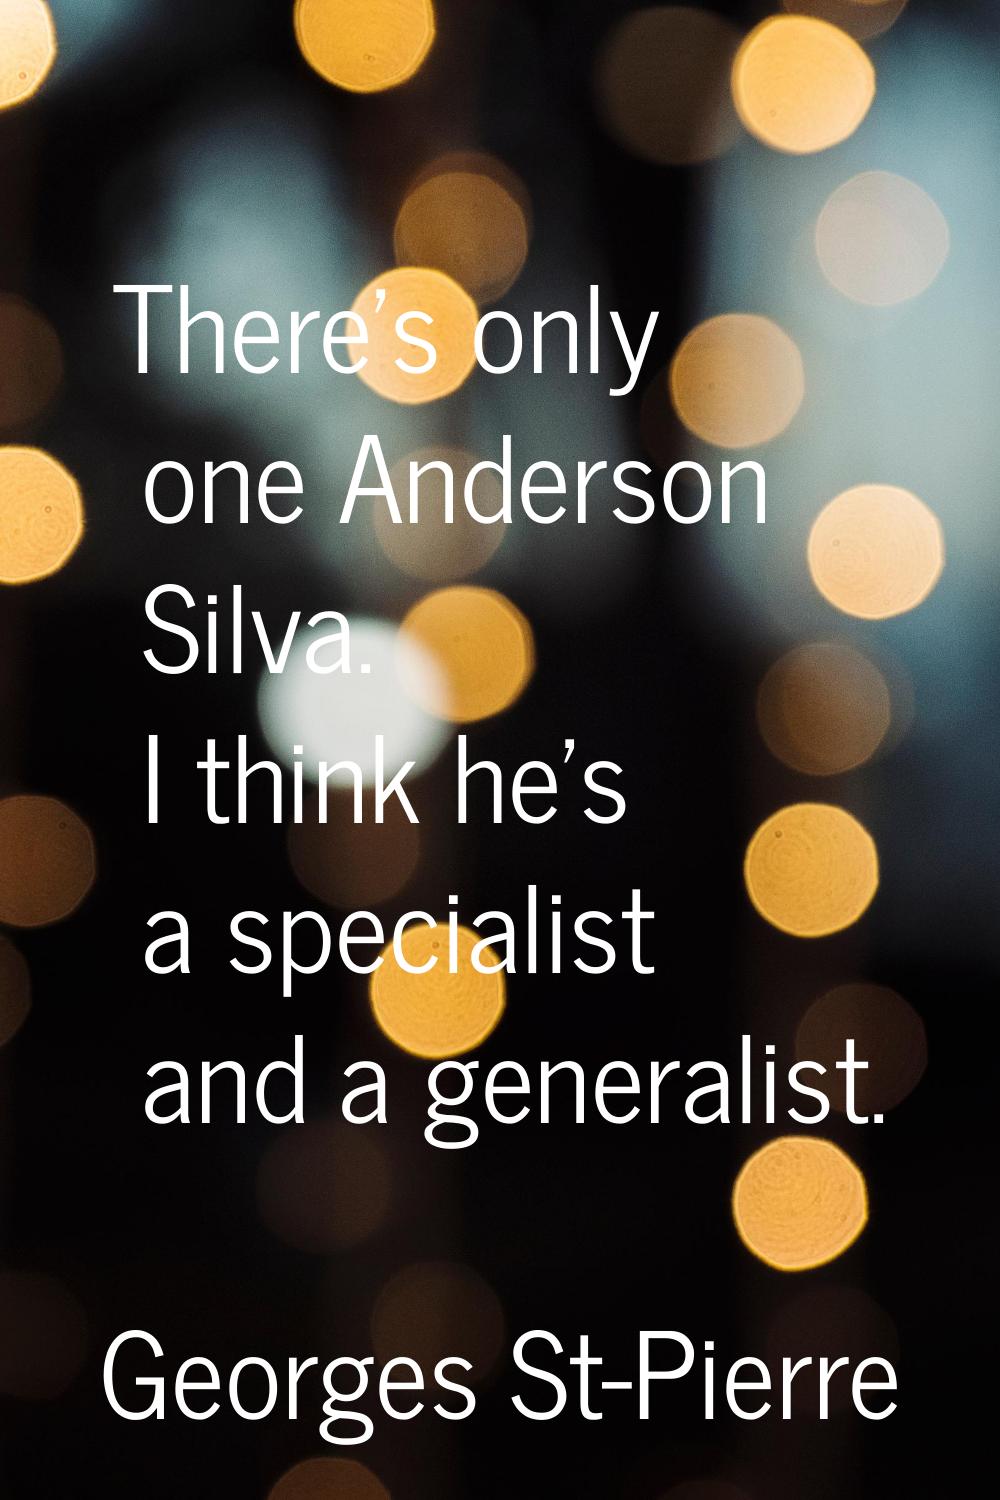 There's only one Anderson Silva. I think he's a specialist and a generalist.